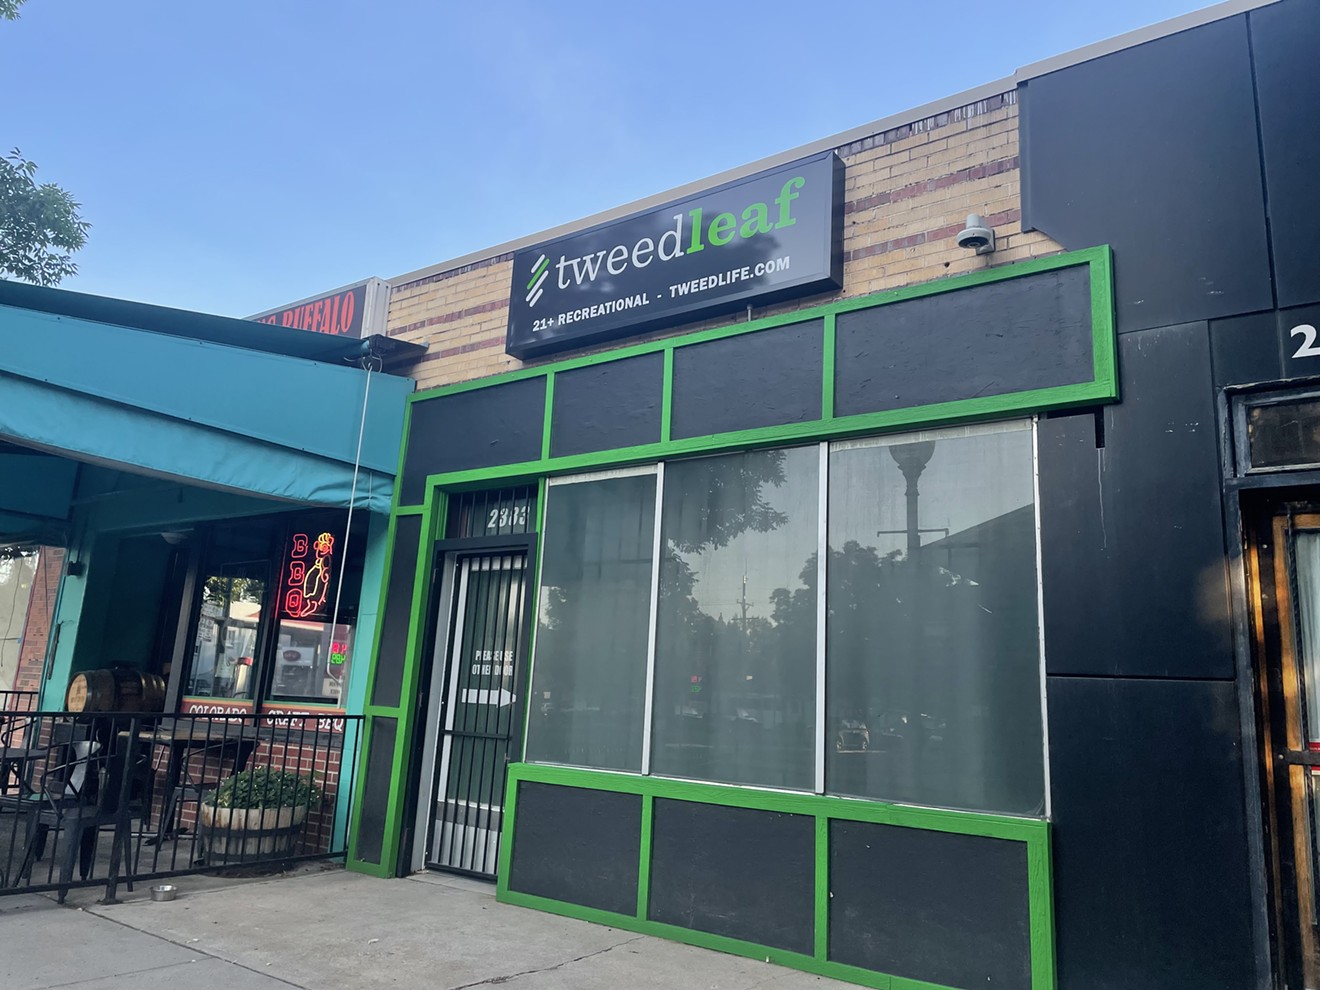 TweedLeaf operated seven stores across Colorado before being shut down for unpaid sales taxes.